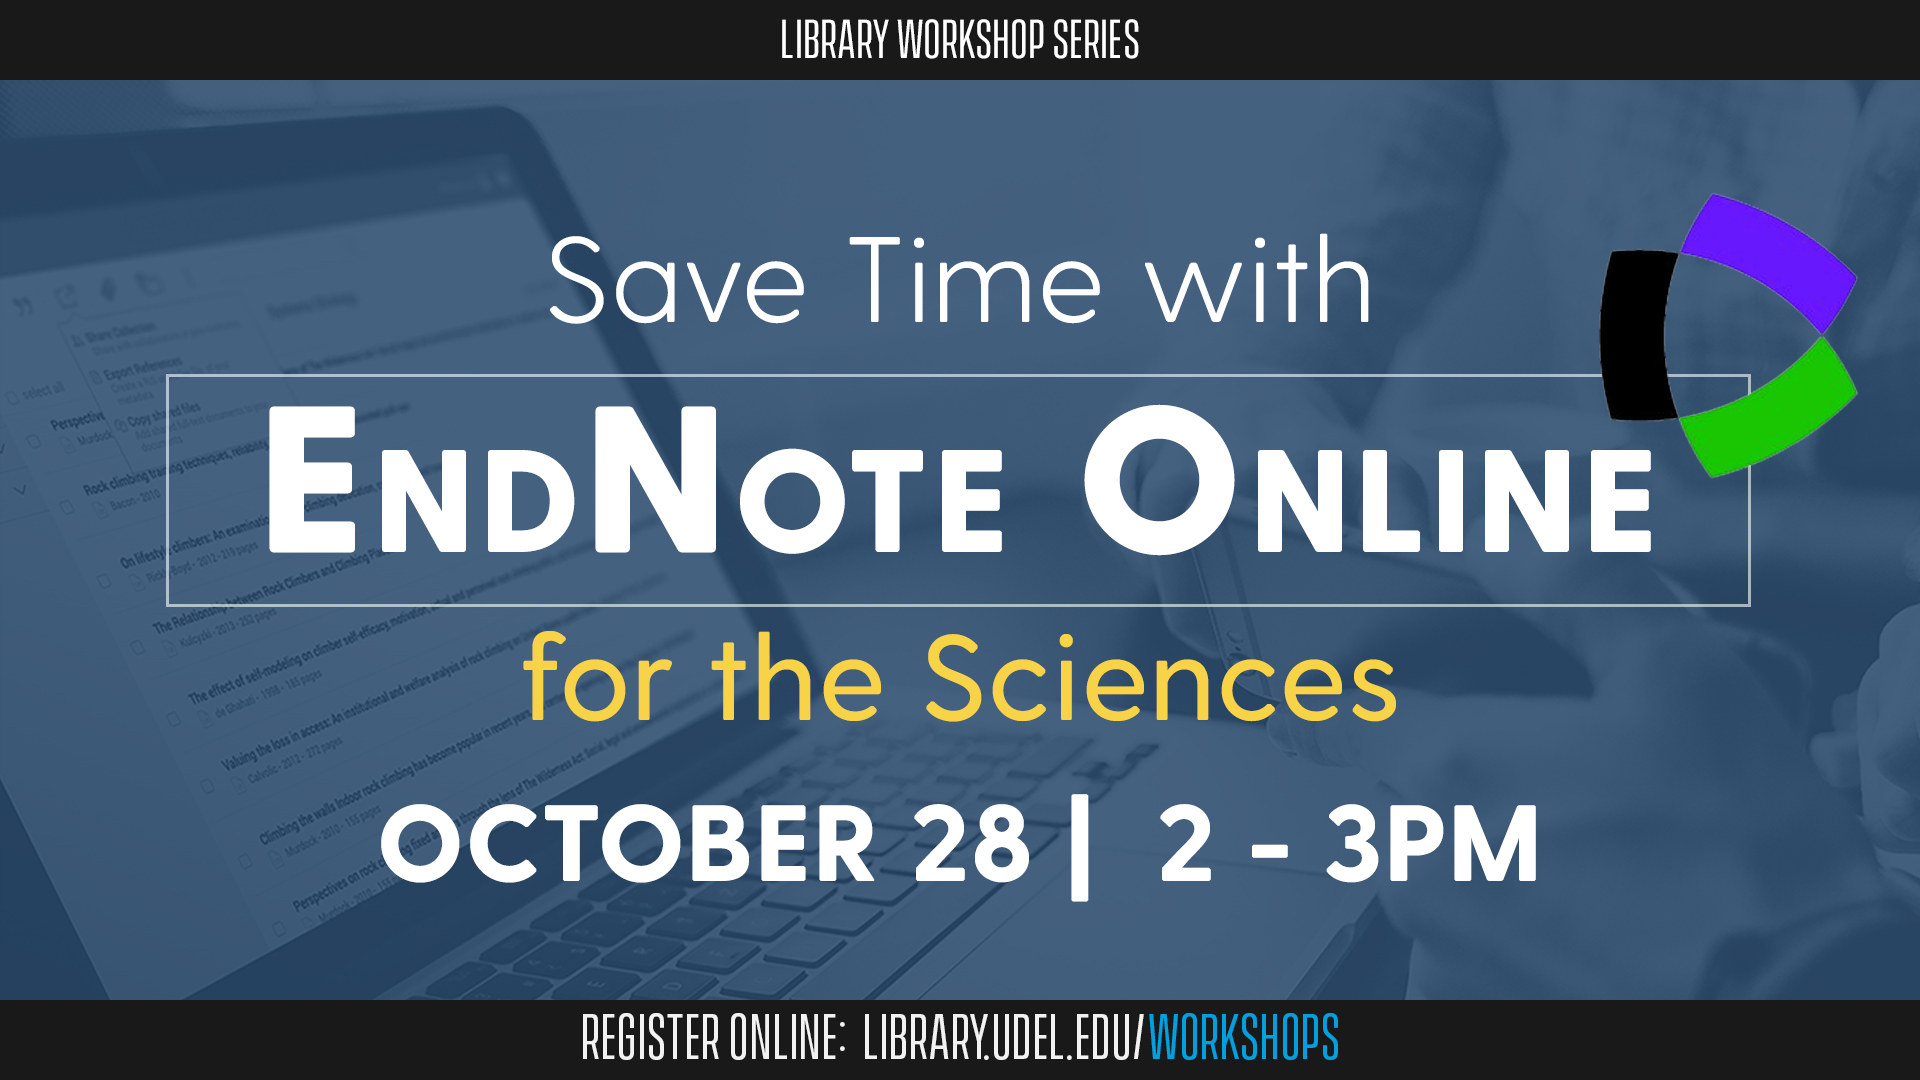 Save Time with EndNote Online for the Sciences